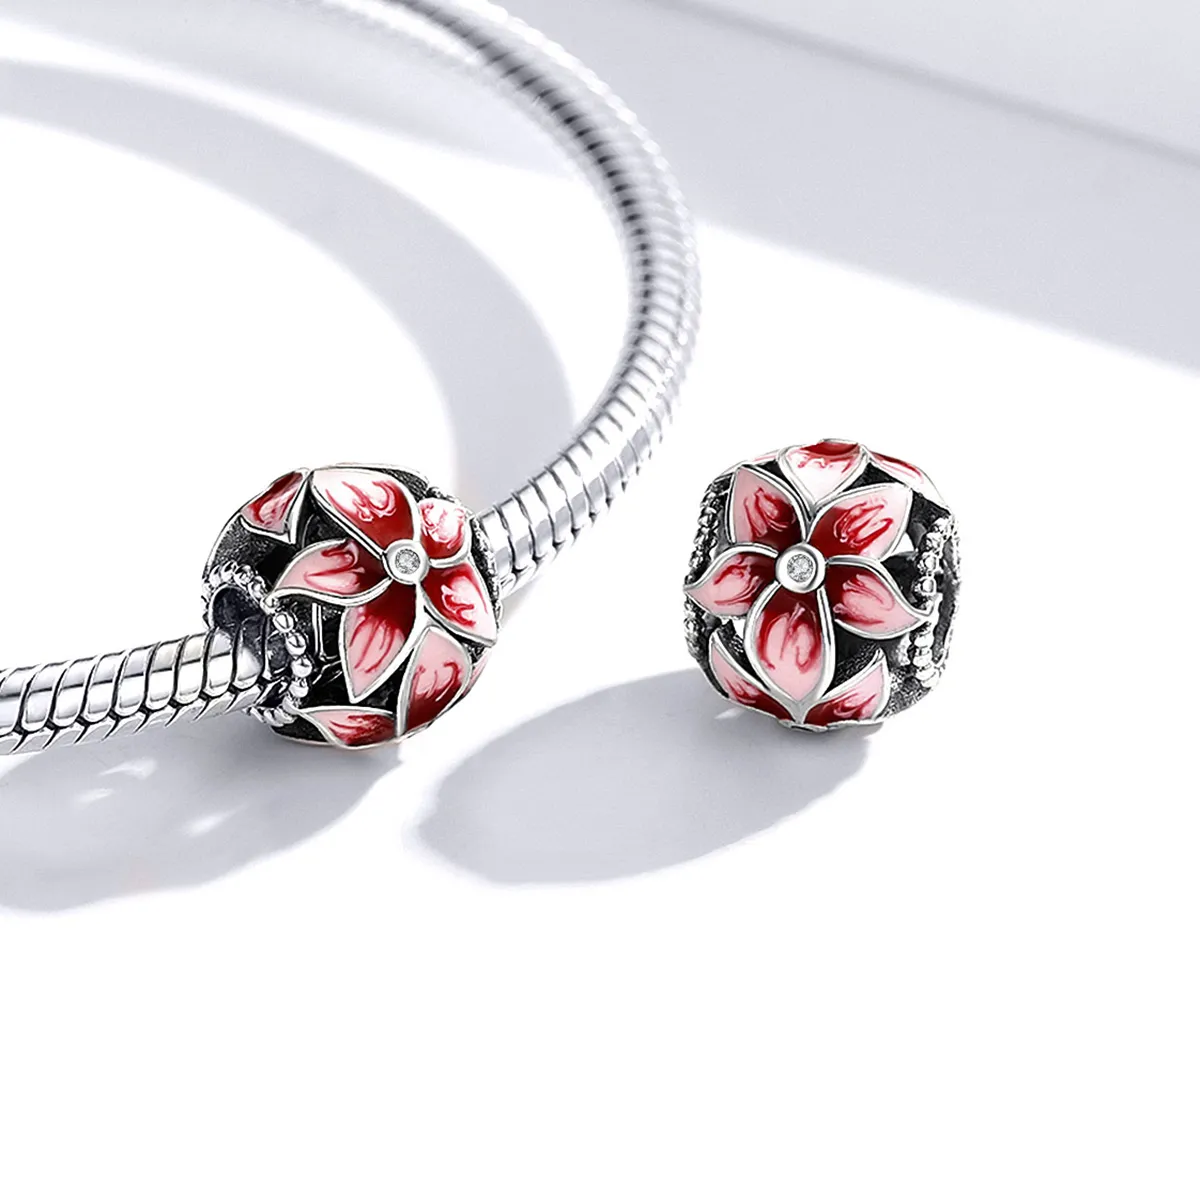 Pandora Style Silver Blooming Flower Charm - SCC1707